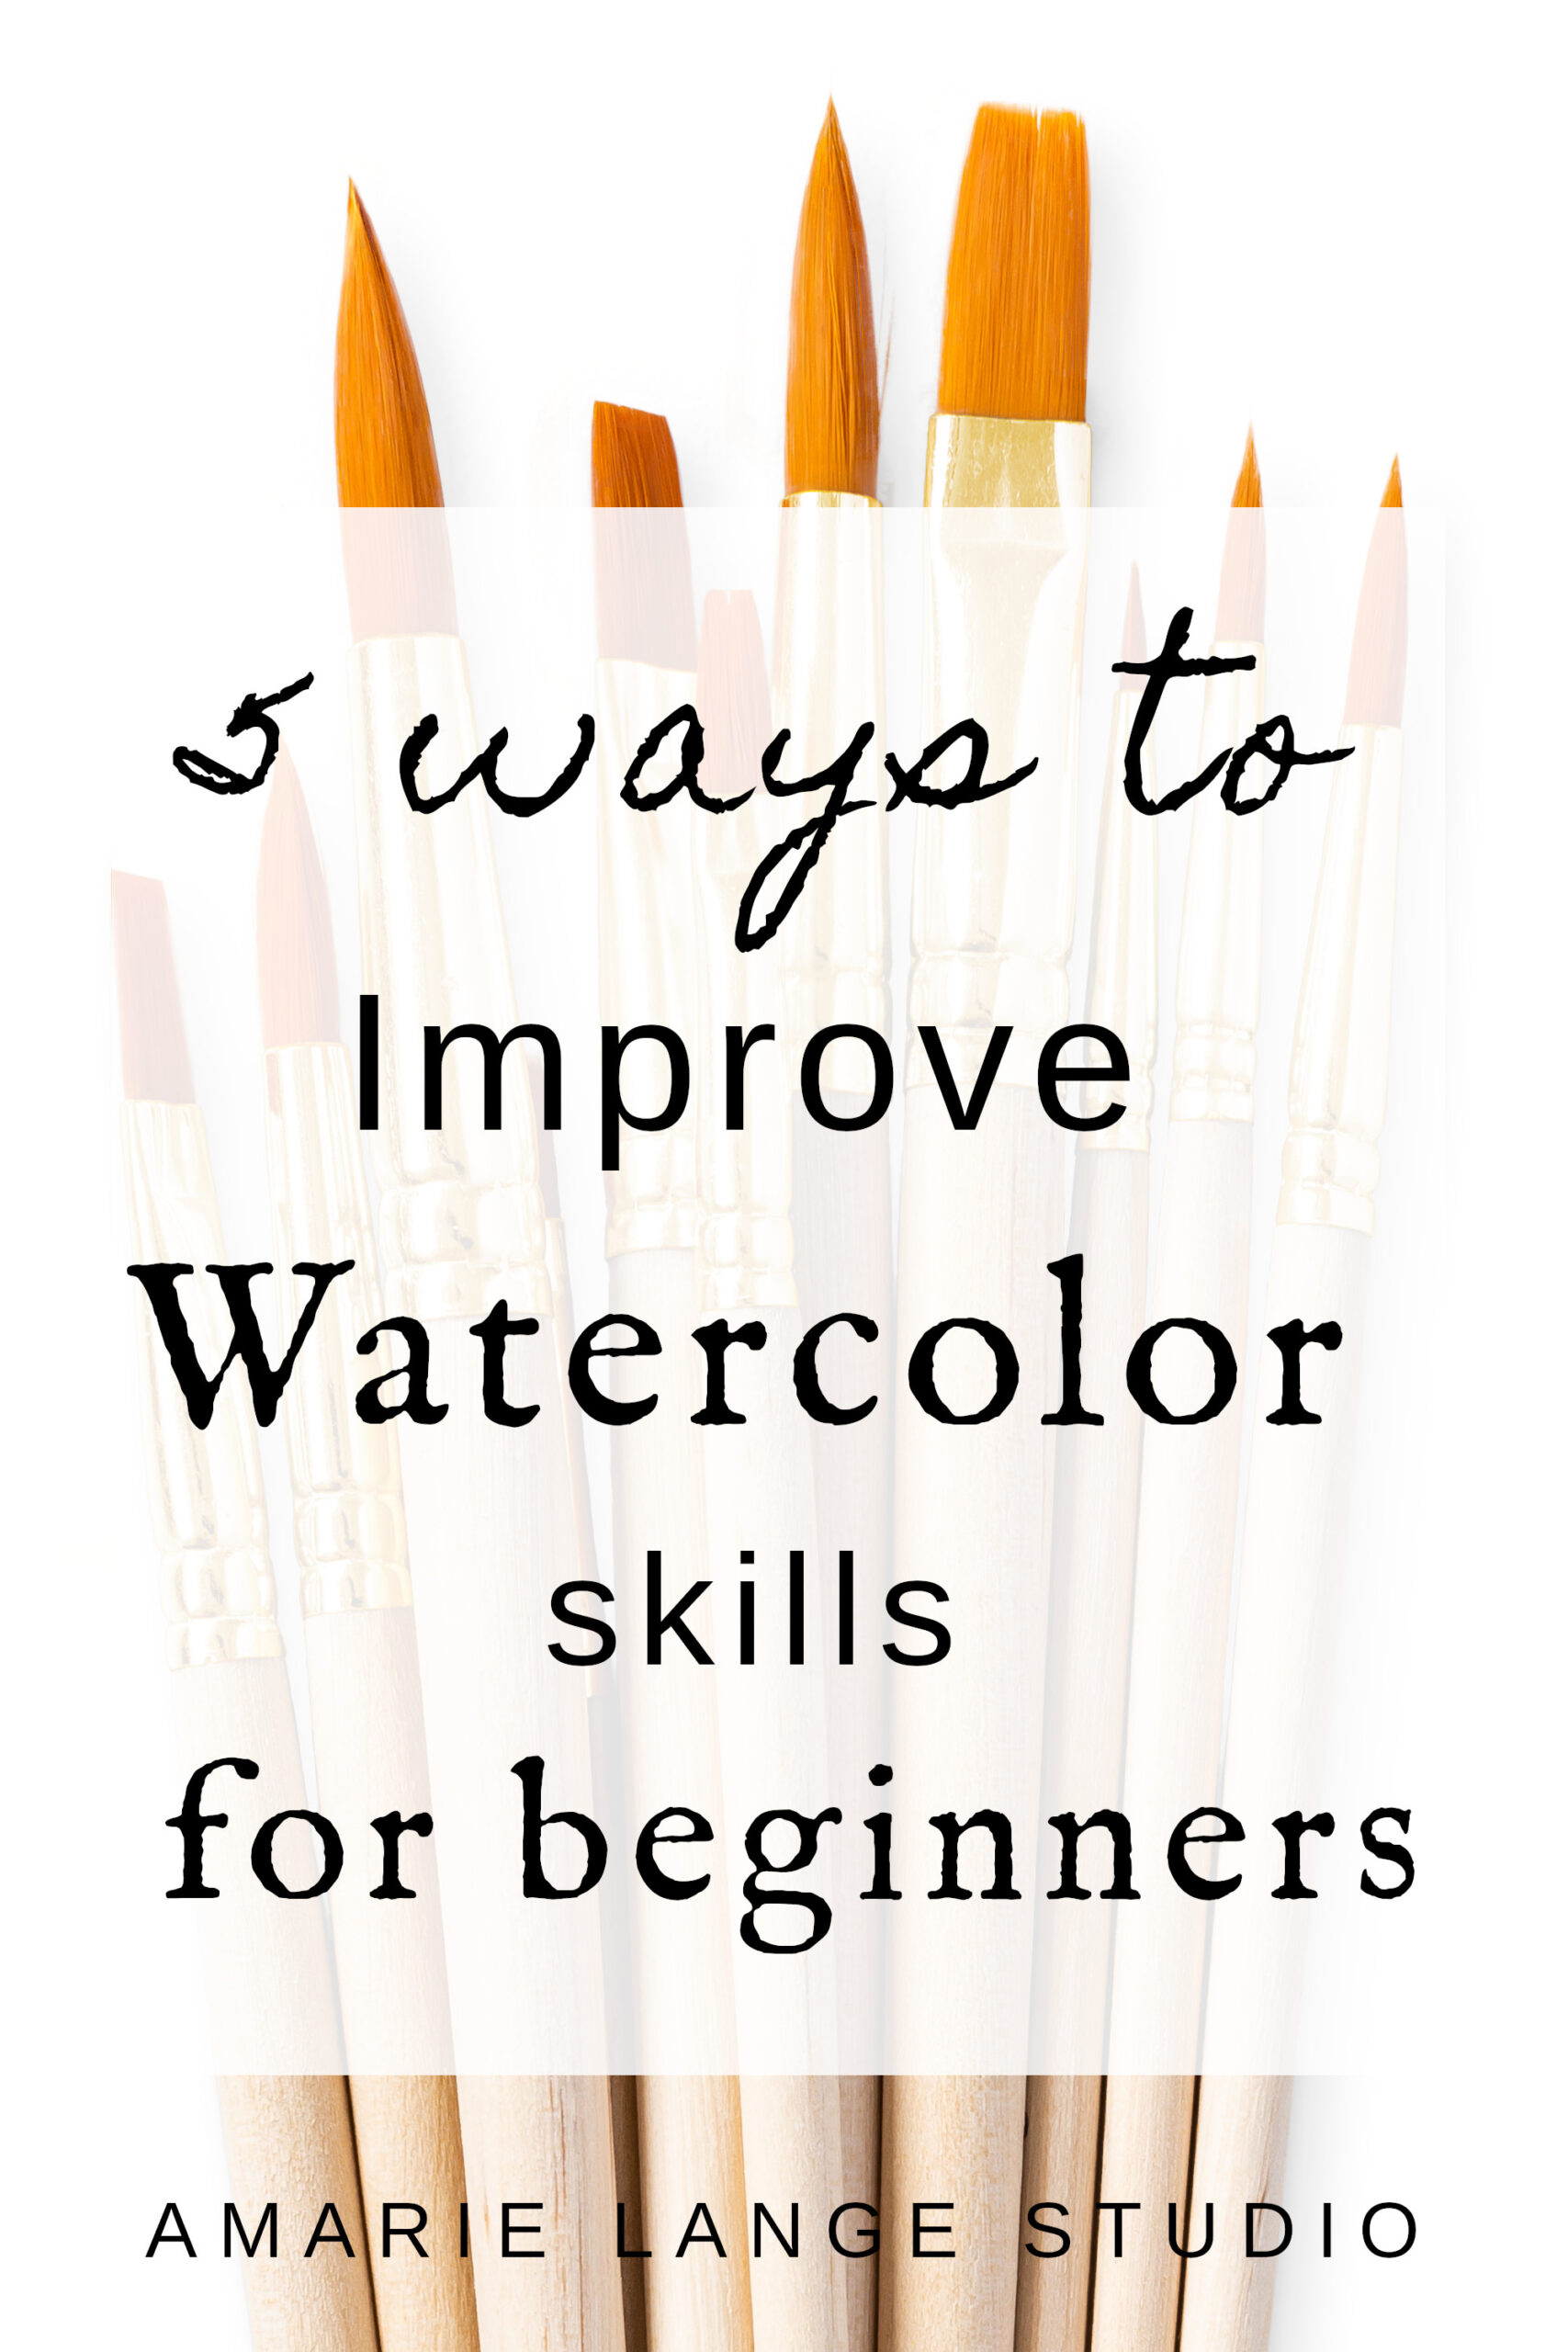 Watercolor Painting for Beginners: 5 Things You Can Do Now To Improve Your Skills Instantly